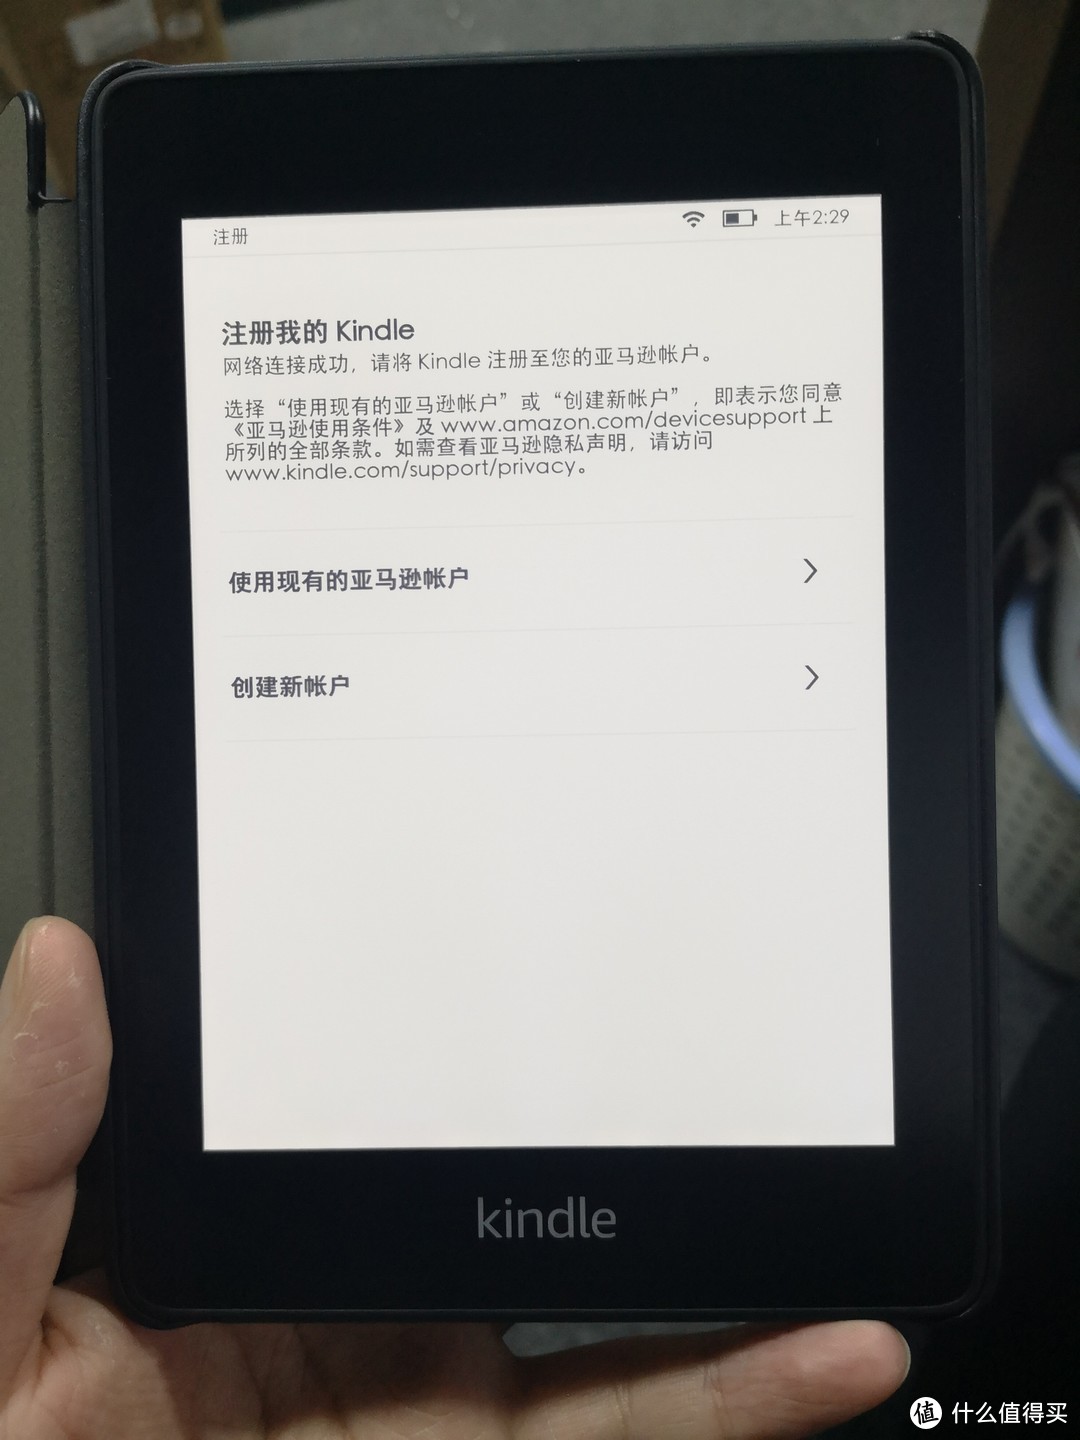 Kindle paperwhite4开箱小评测